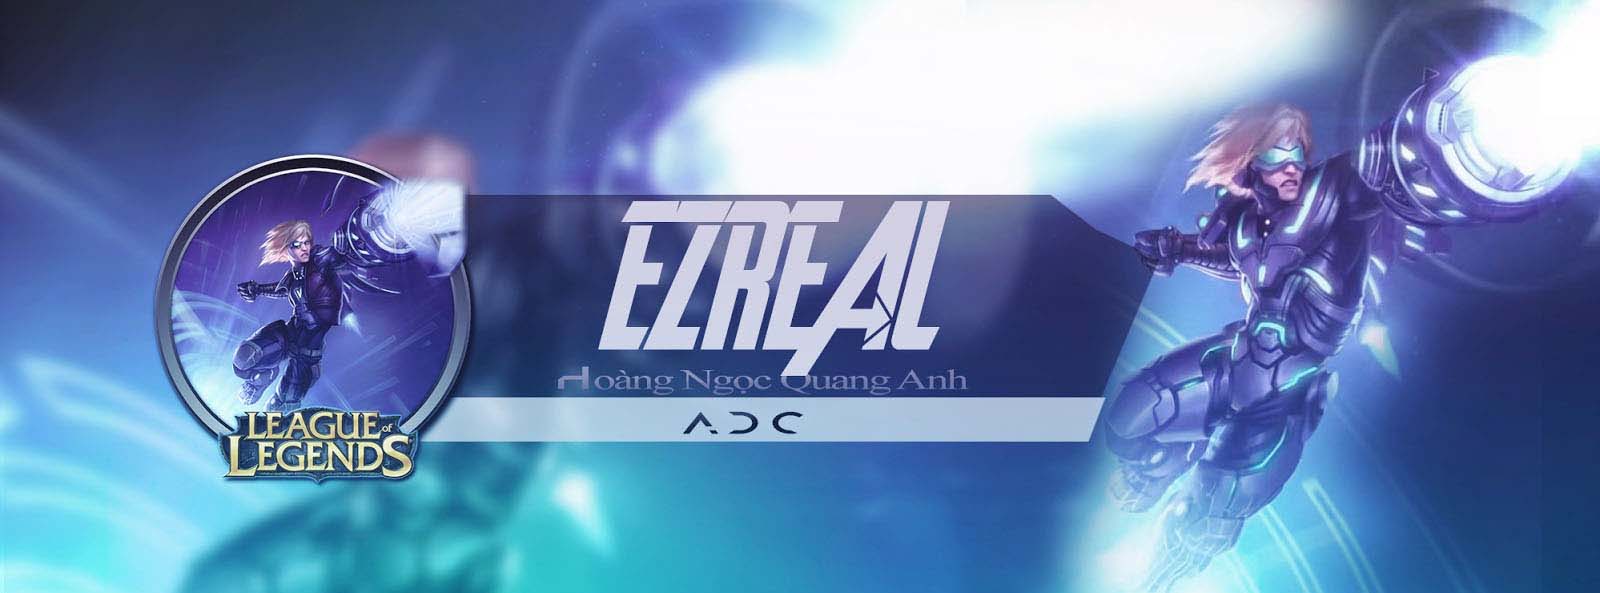 anh-bia-ezreal